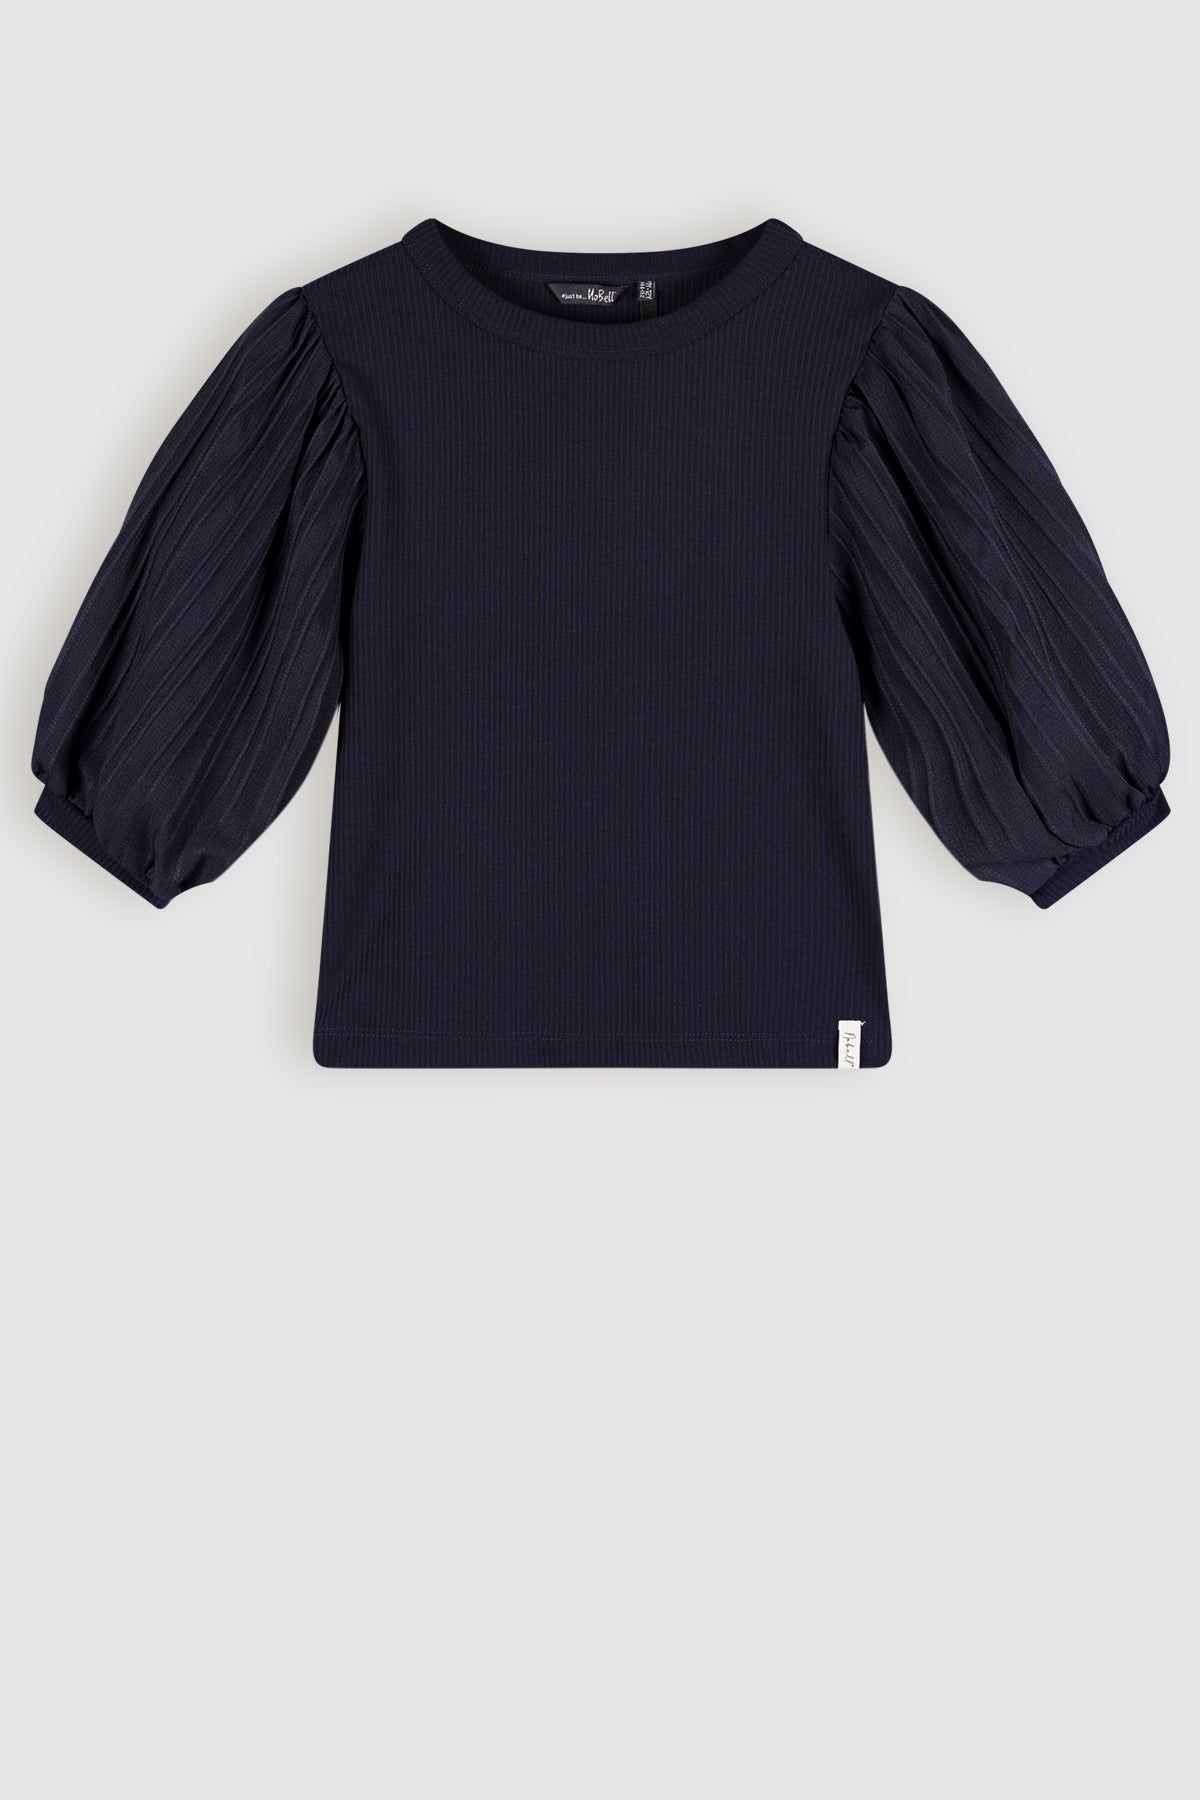 T-Shirt Kylia Cropped Top Navy